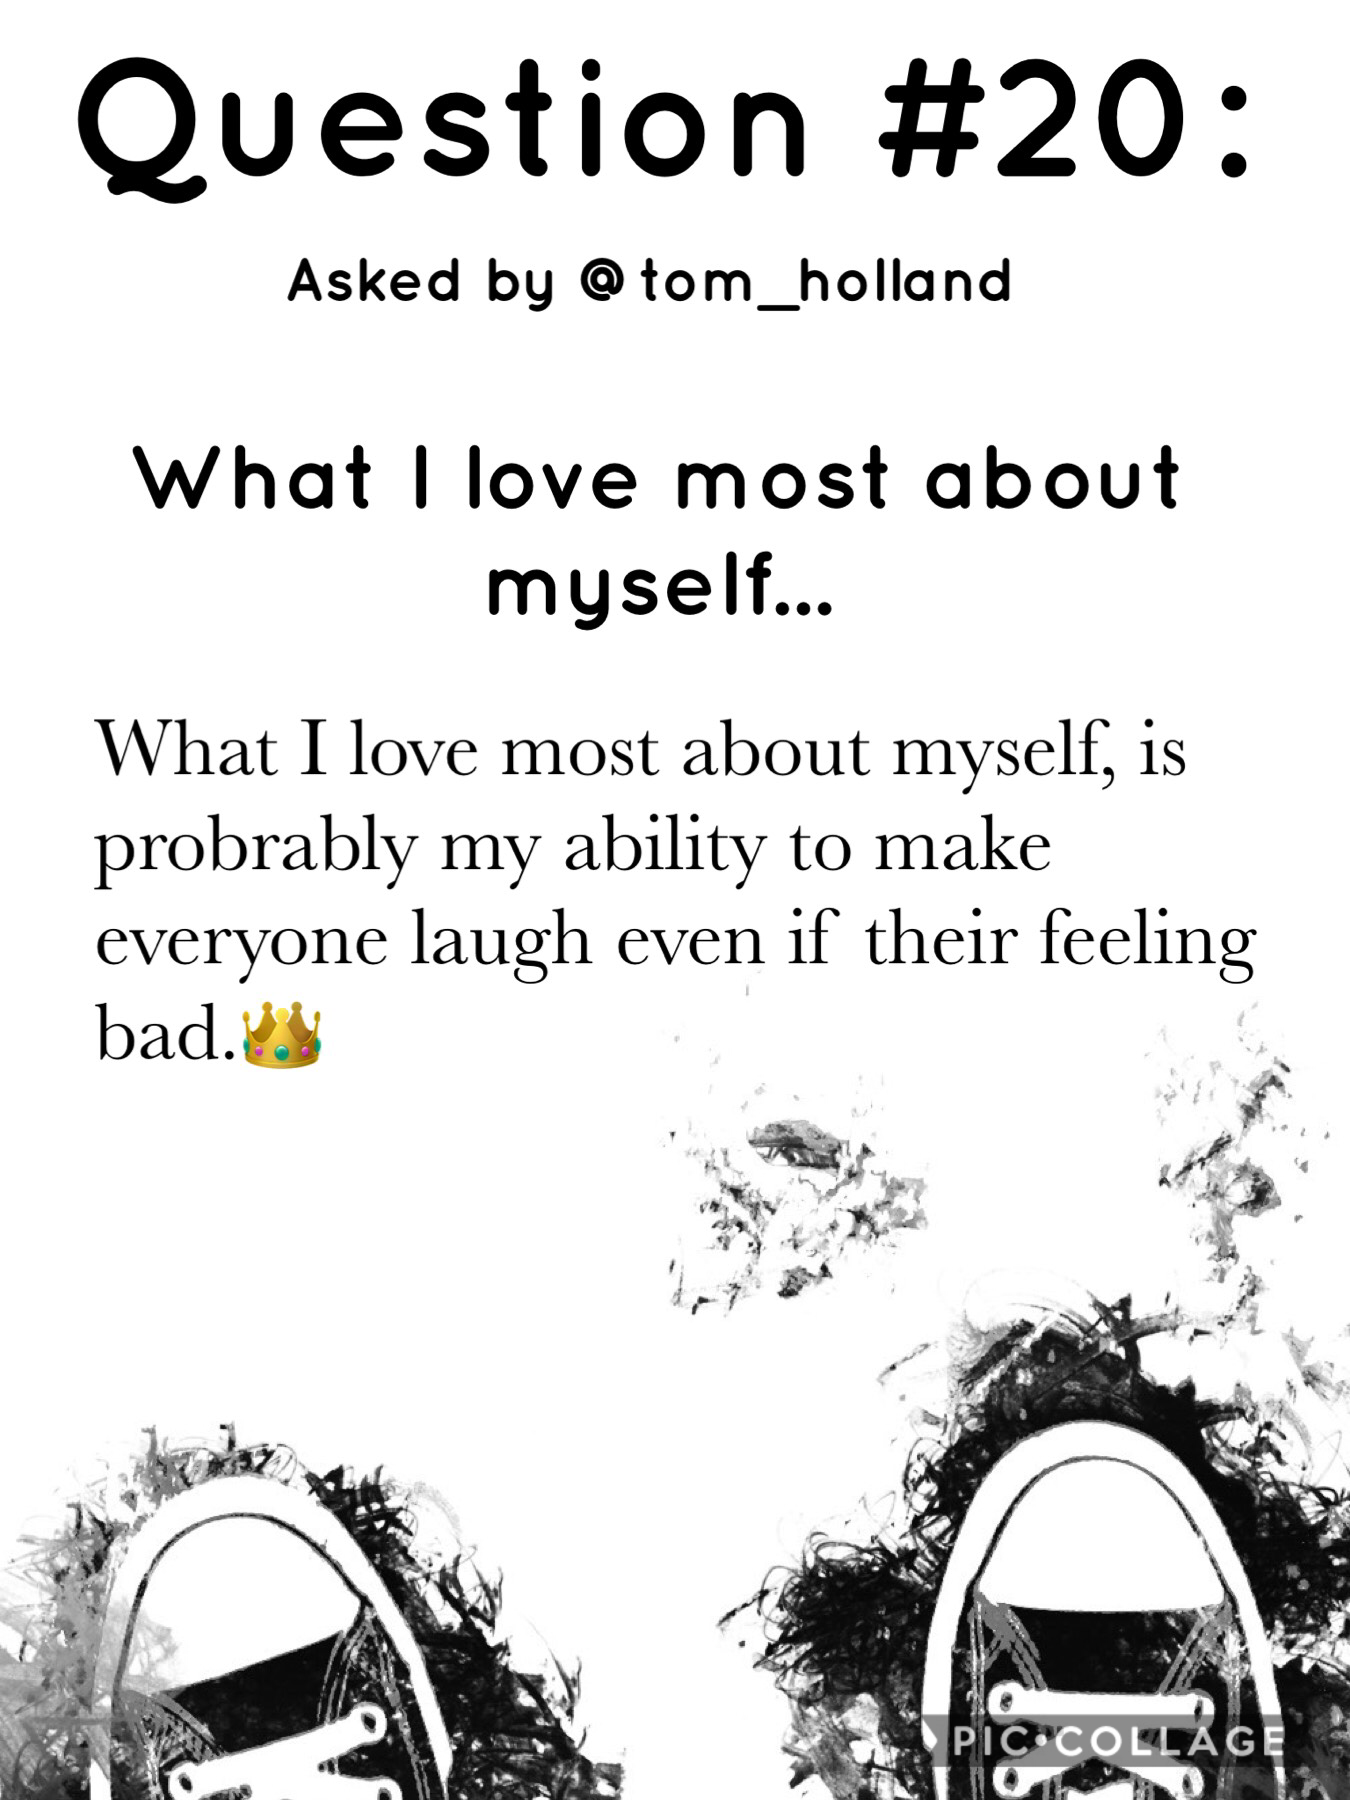 Post 77: Thanks for the question @tom_holland👑🤩